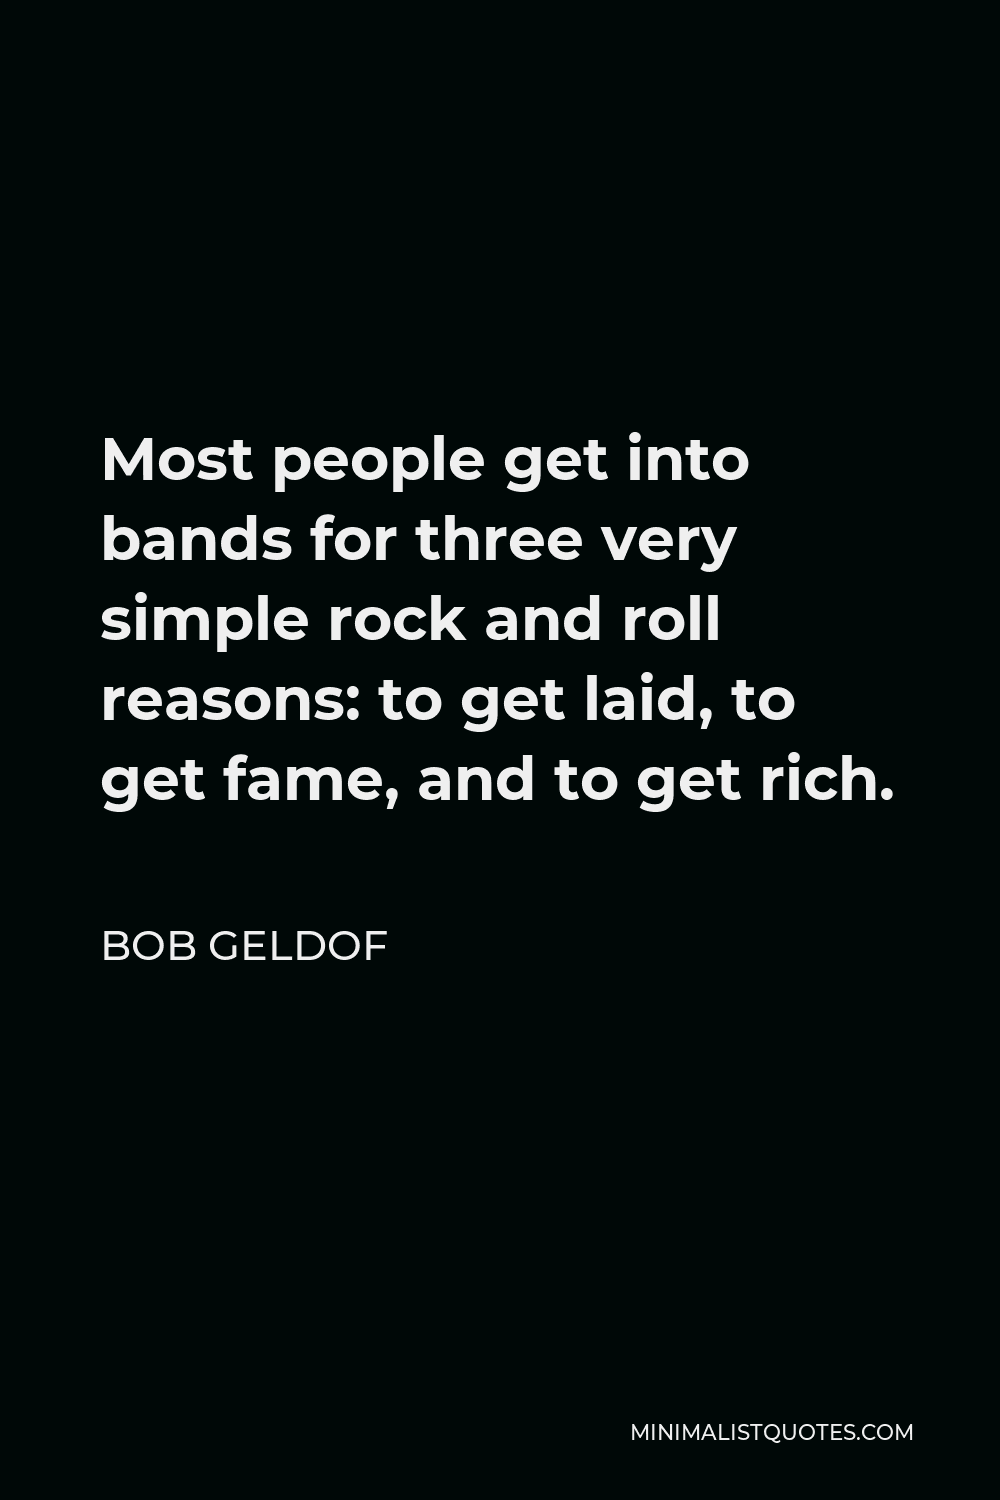 Bob Geldof Quote - Most people get into bands for three very simple rock and roll reasons: to get laid, to get fame, and to get rich.